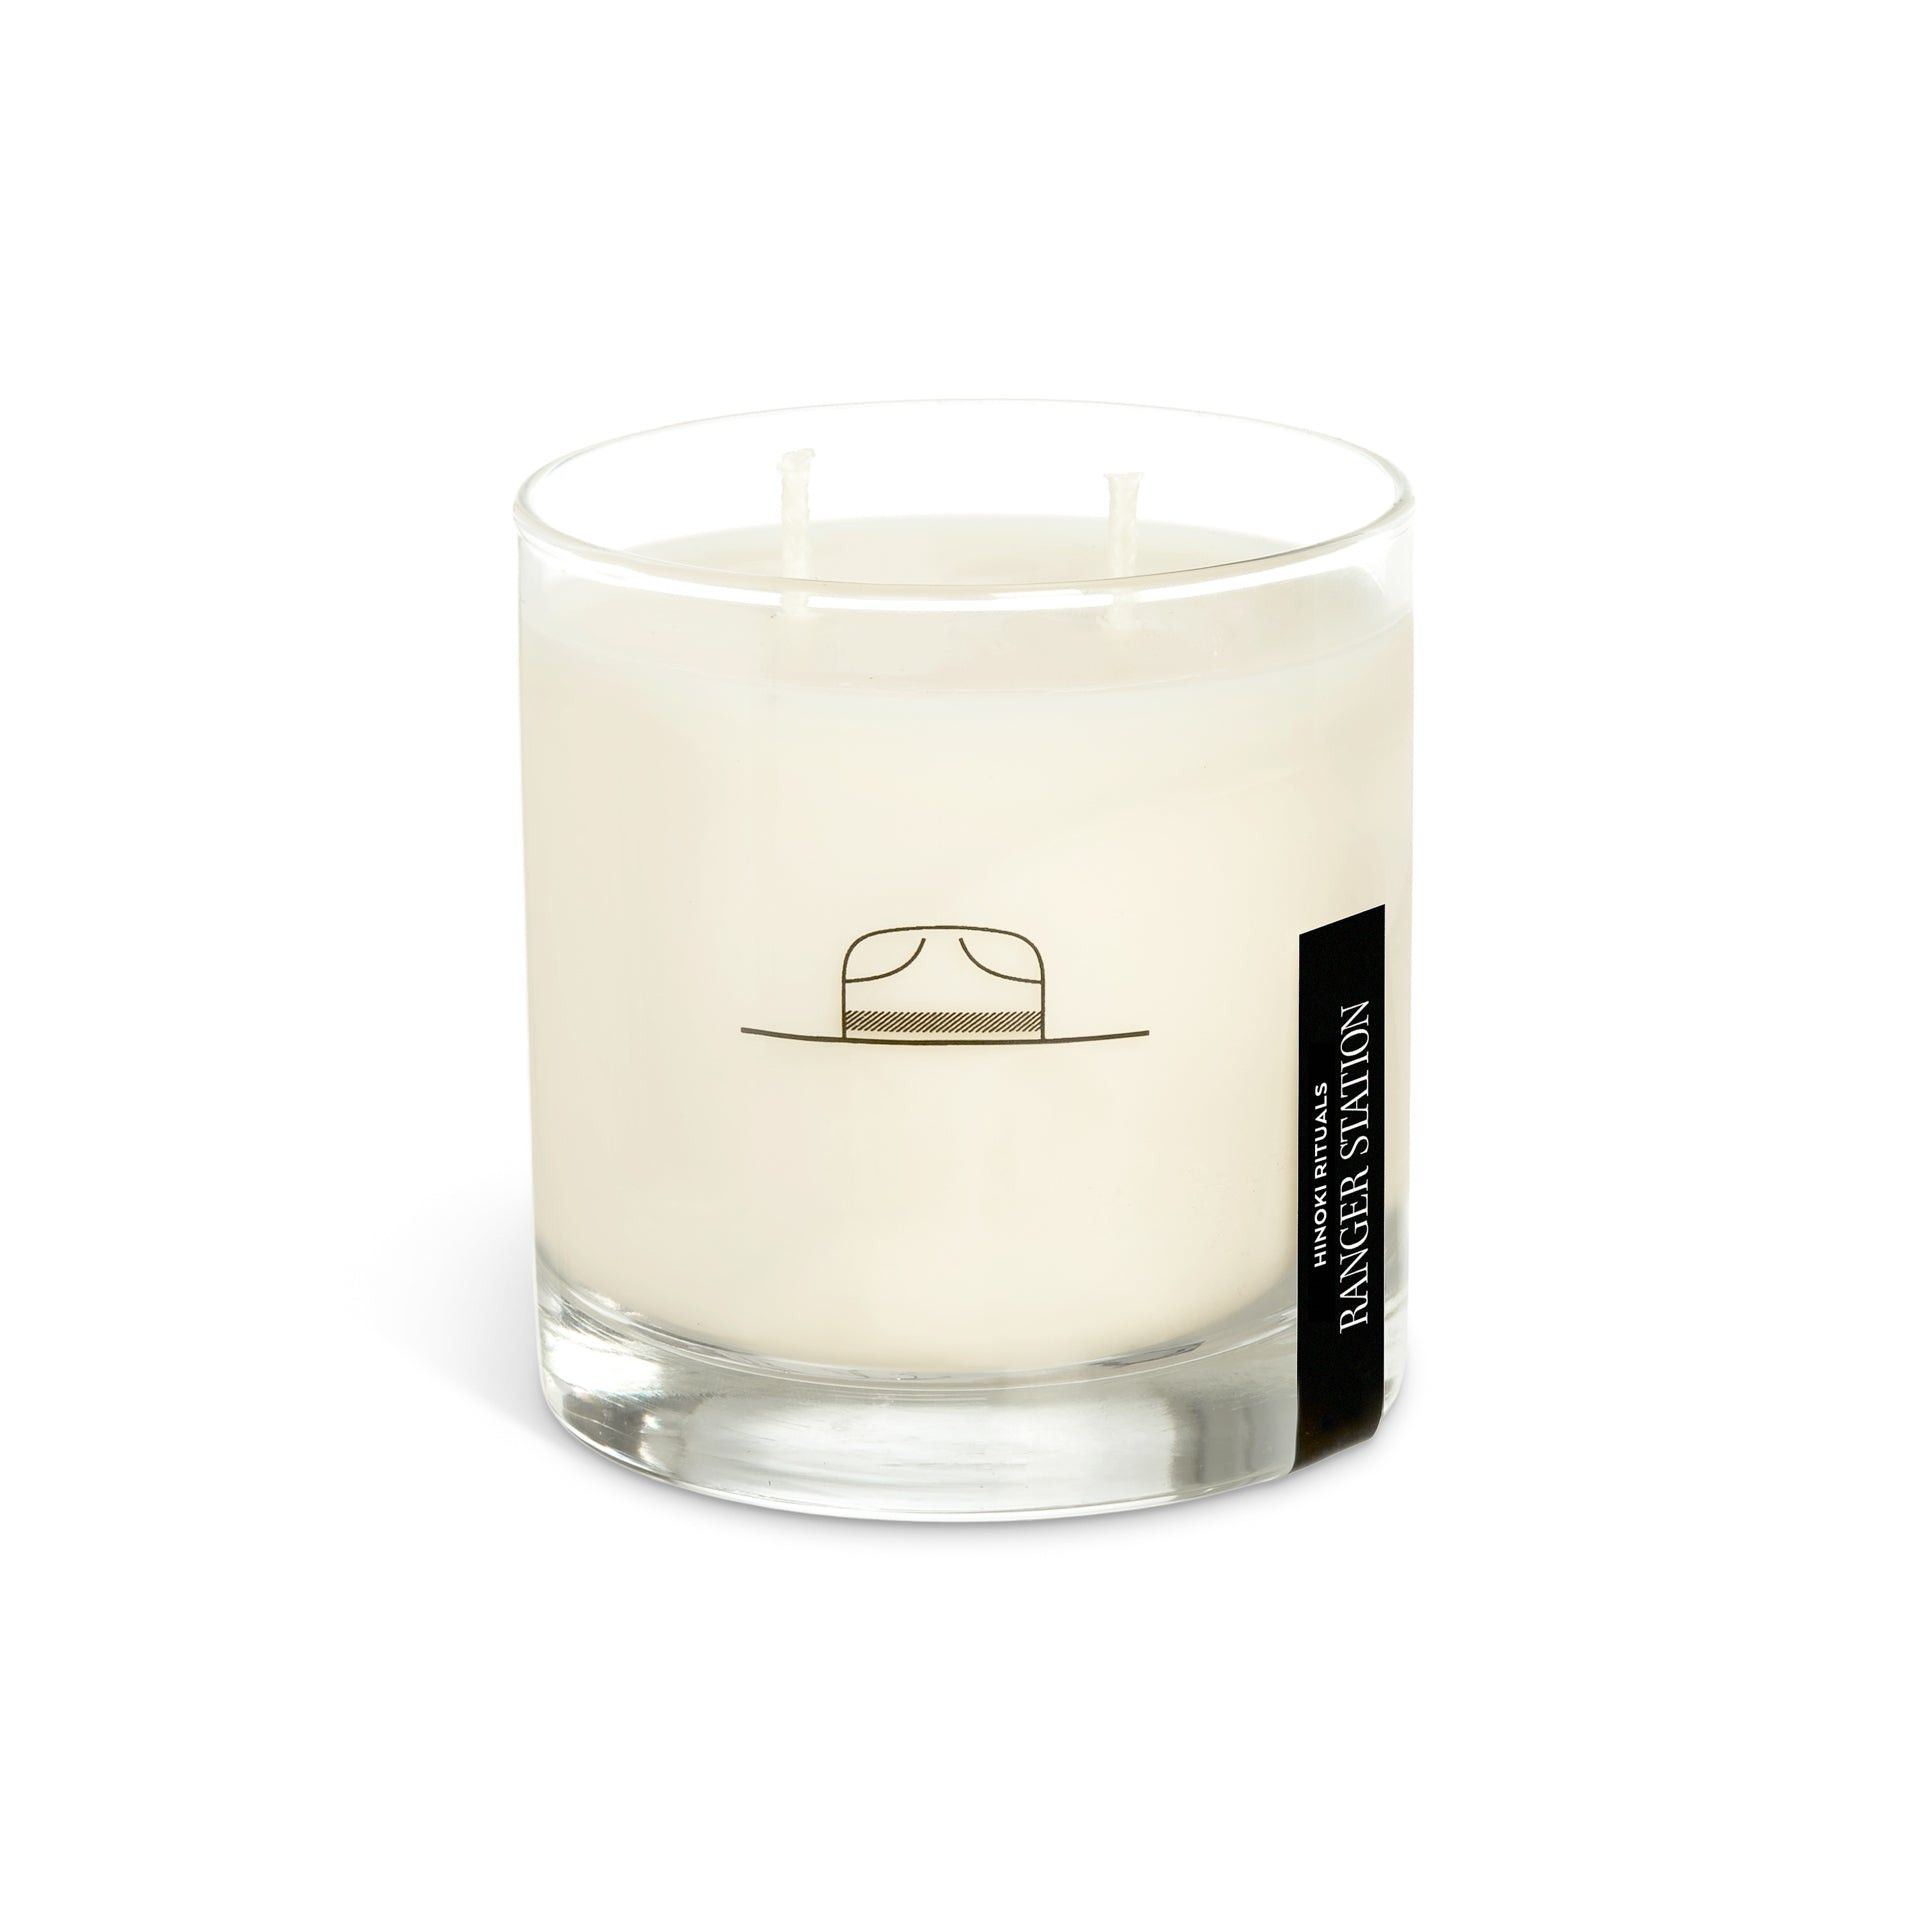 HINOKI RITUALS CANDLE (LIMITED EDITION) | Ranger Station 